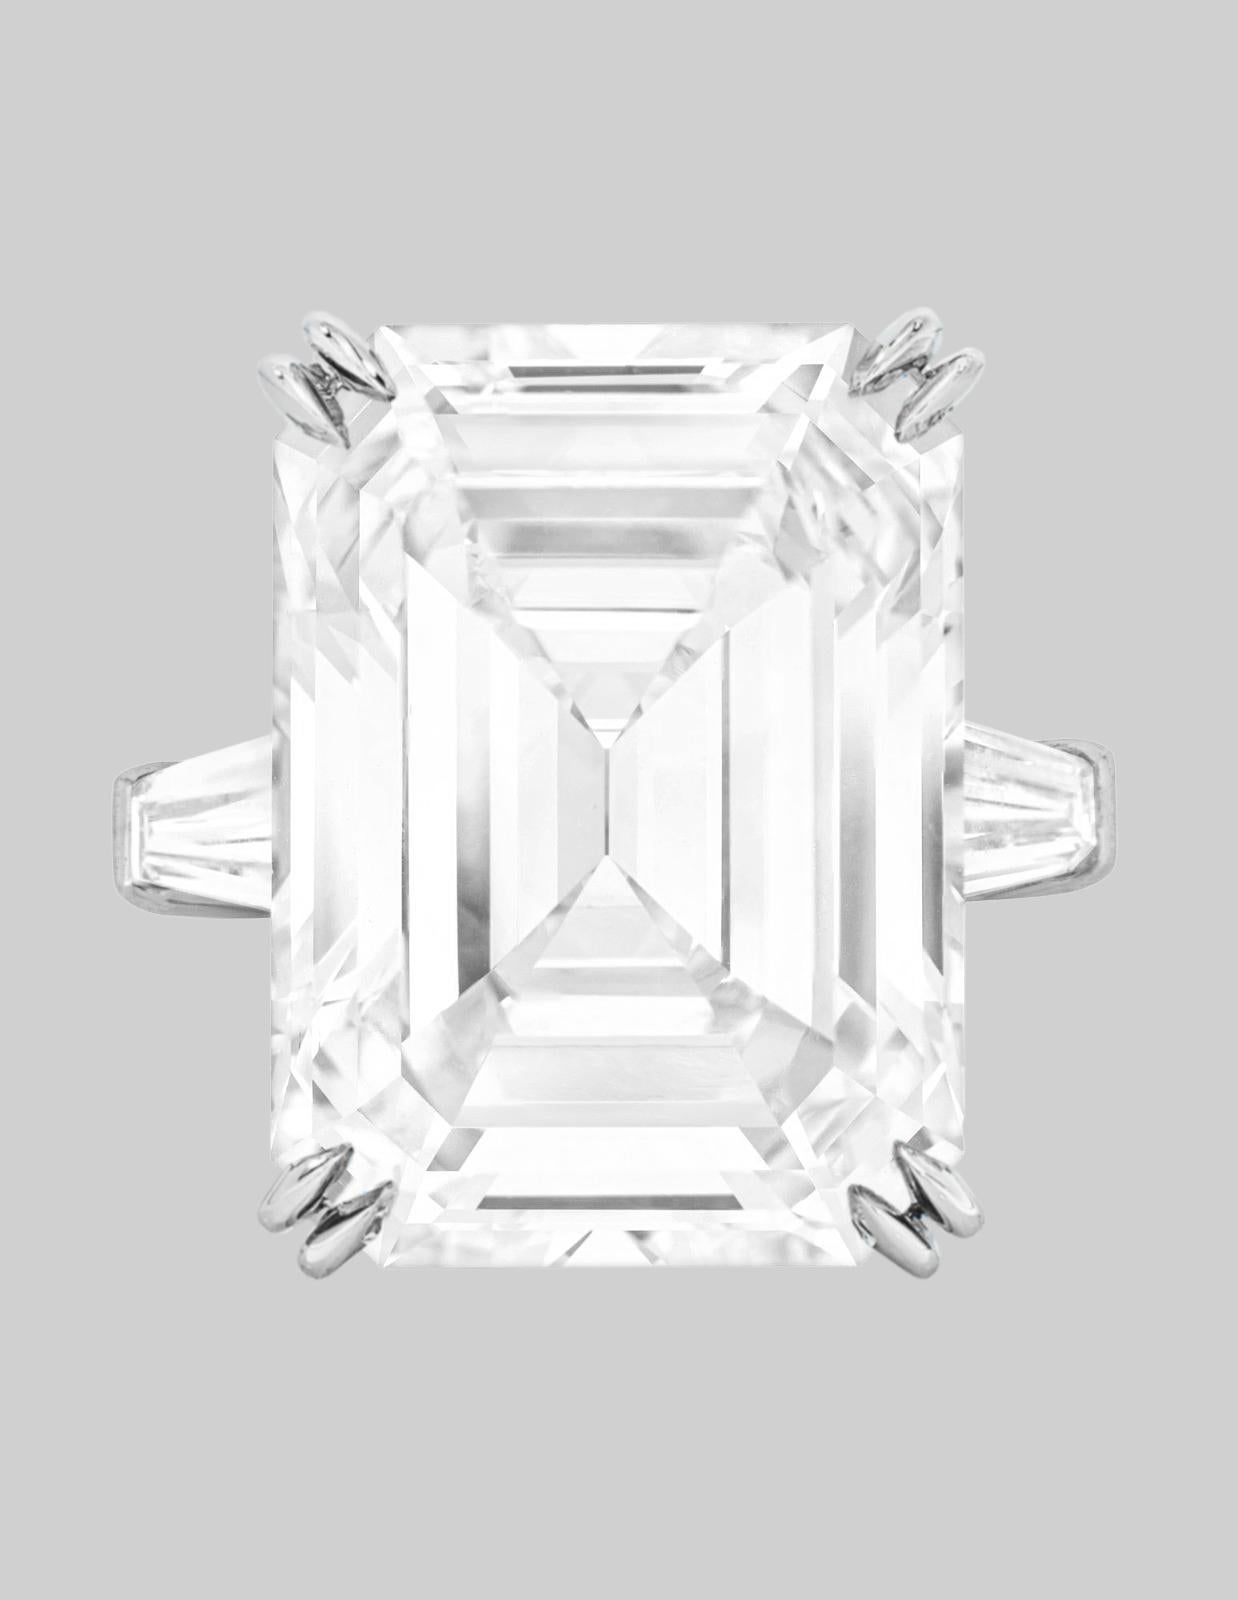 Any emerald-cut lover will fall for this nearly nine carat diamond classic engagement ring with its ideal platinum proportions, mirrored depths, and broad flashes of white light. The emerald-cut diamond was the result of increasing precision and